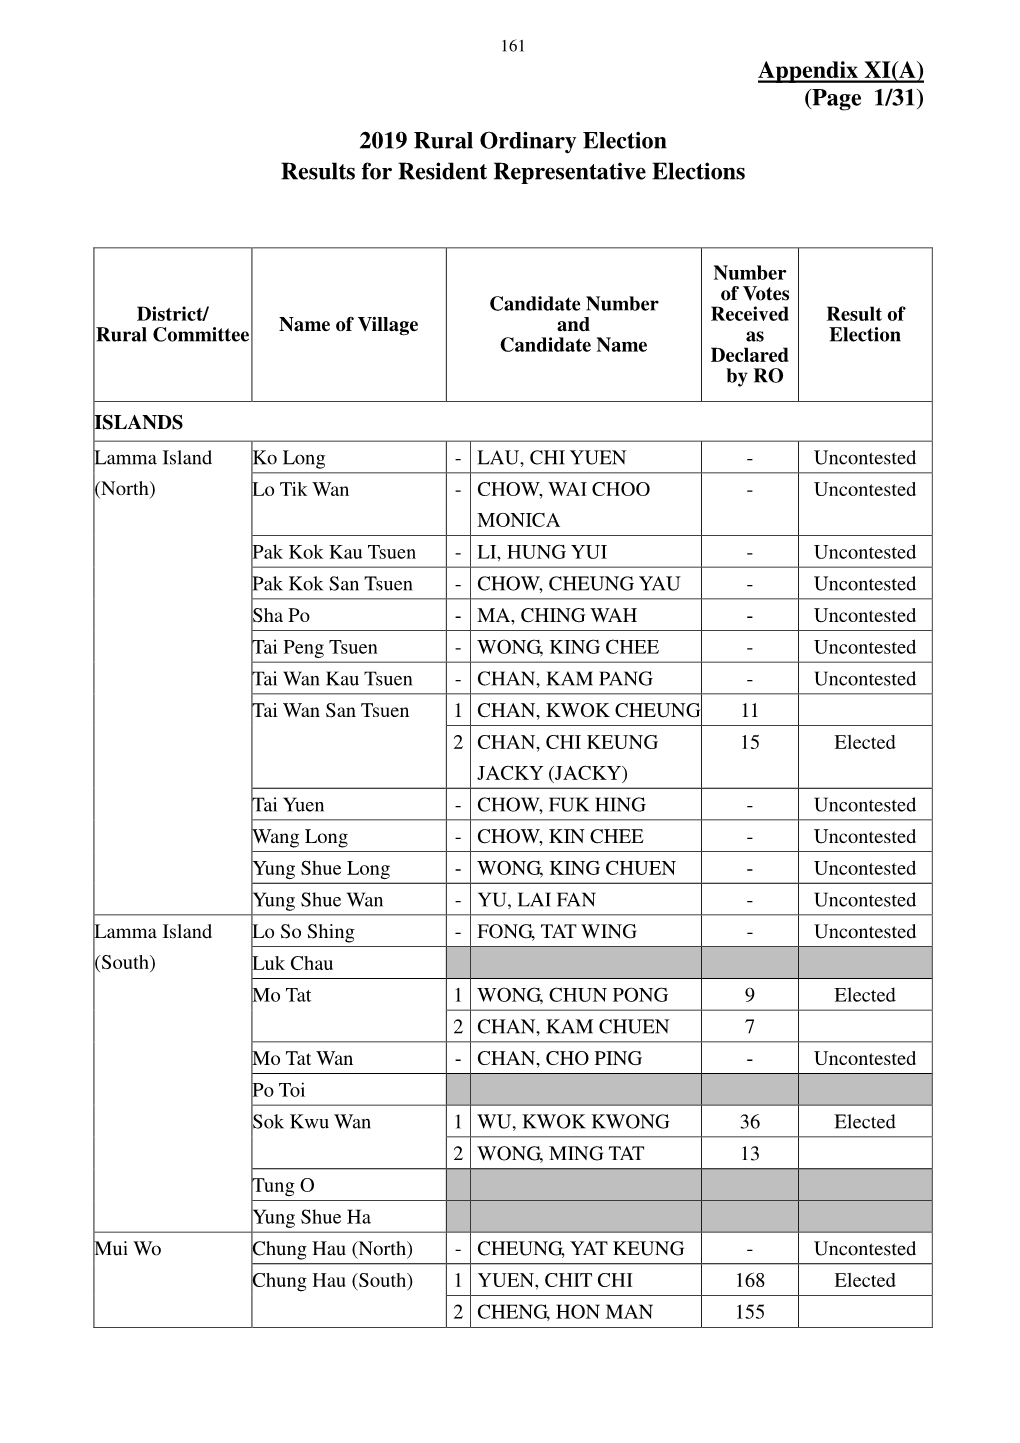 Appendix XI(A) (Page 1/31) 2019 Rural Ordinary Election Results for Resident Representative Elections